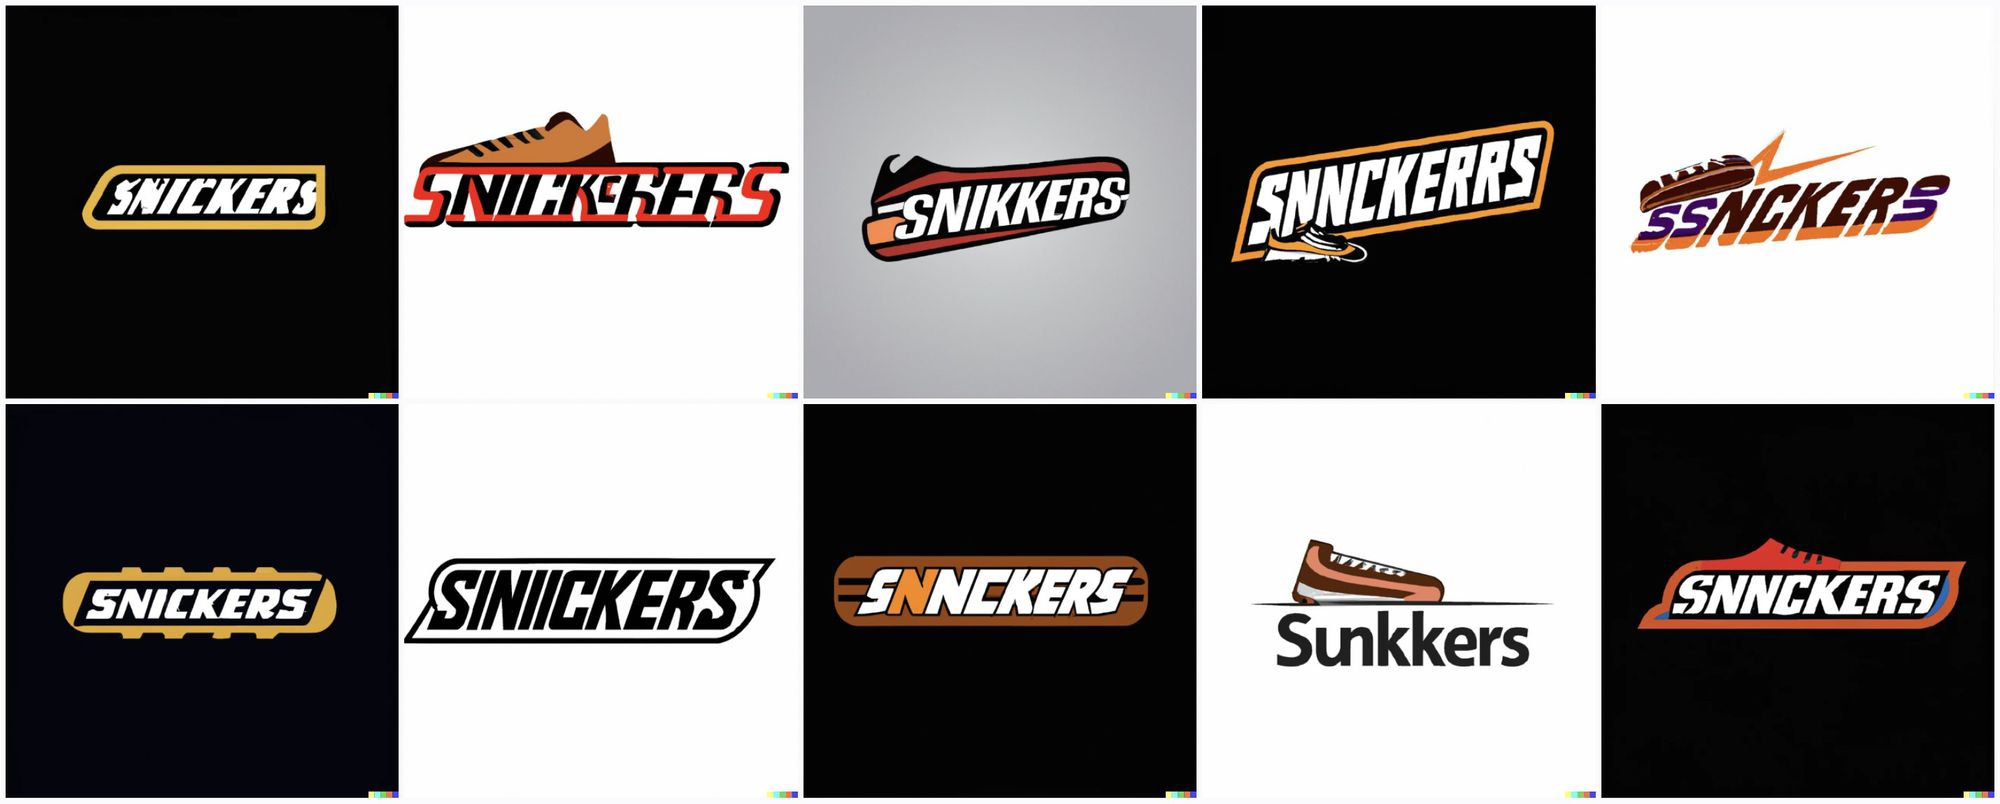 The logos on average look a bit like the Snickers logo, but several of them incorporate small sneakers, and they all say things like "Snnckerrs" and "Siniickers" and "Sunkkers"